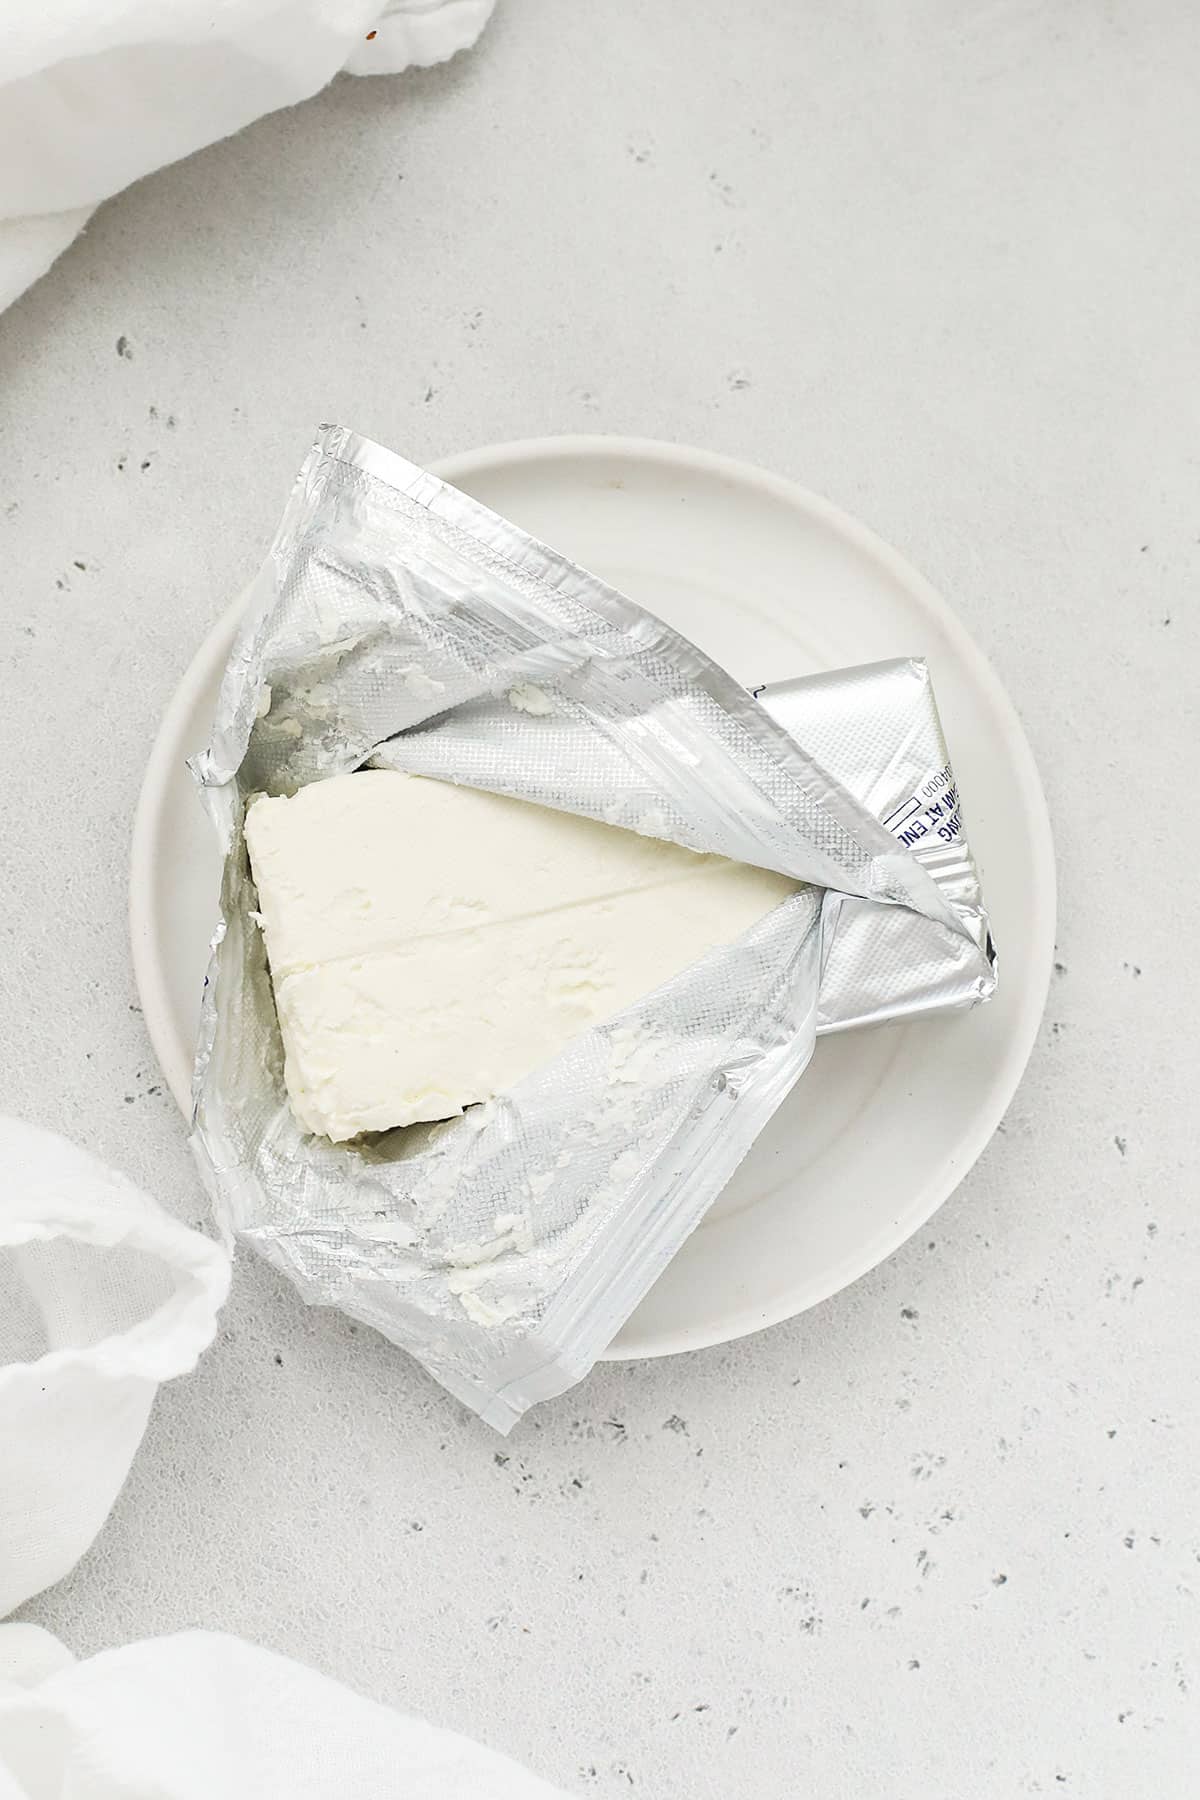 unwrapping a block of cream cheese